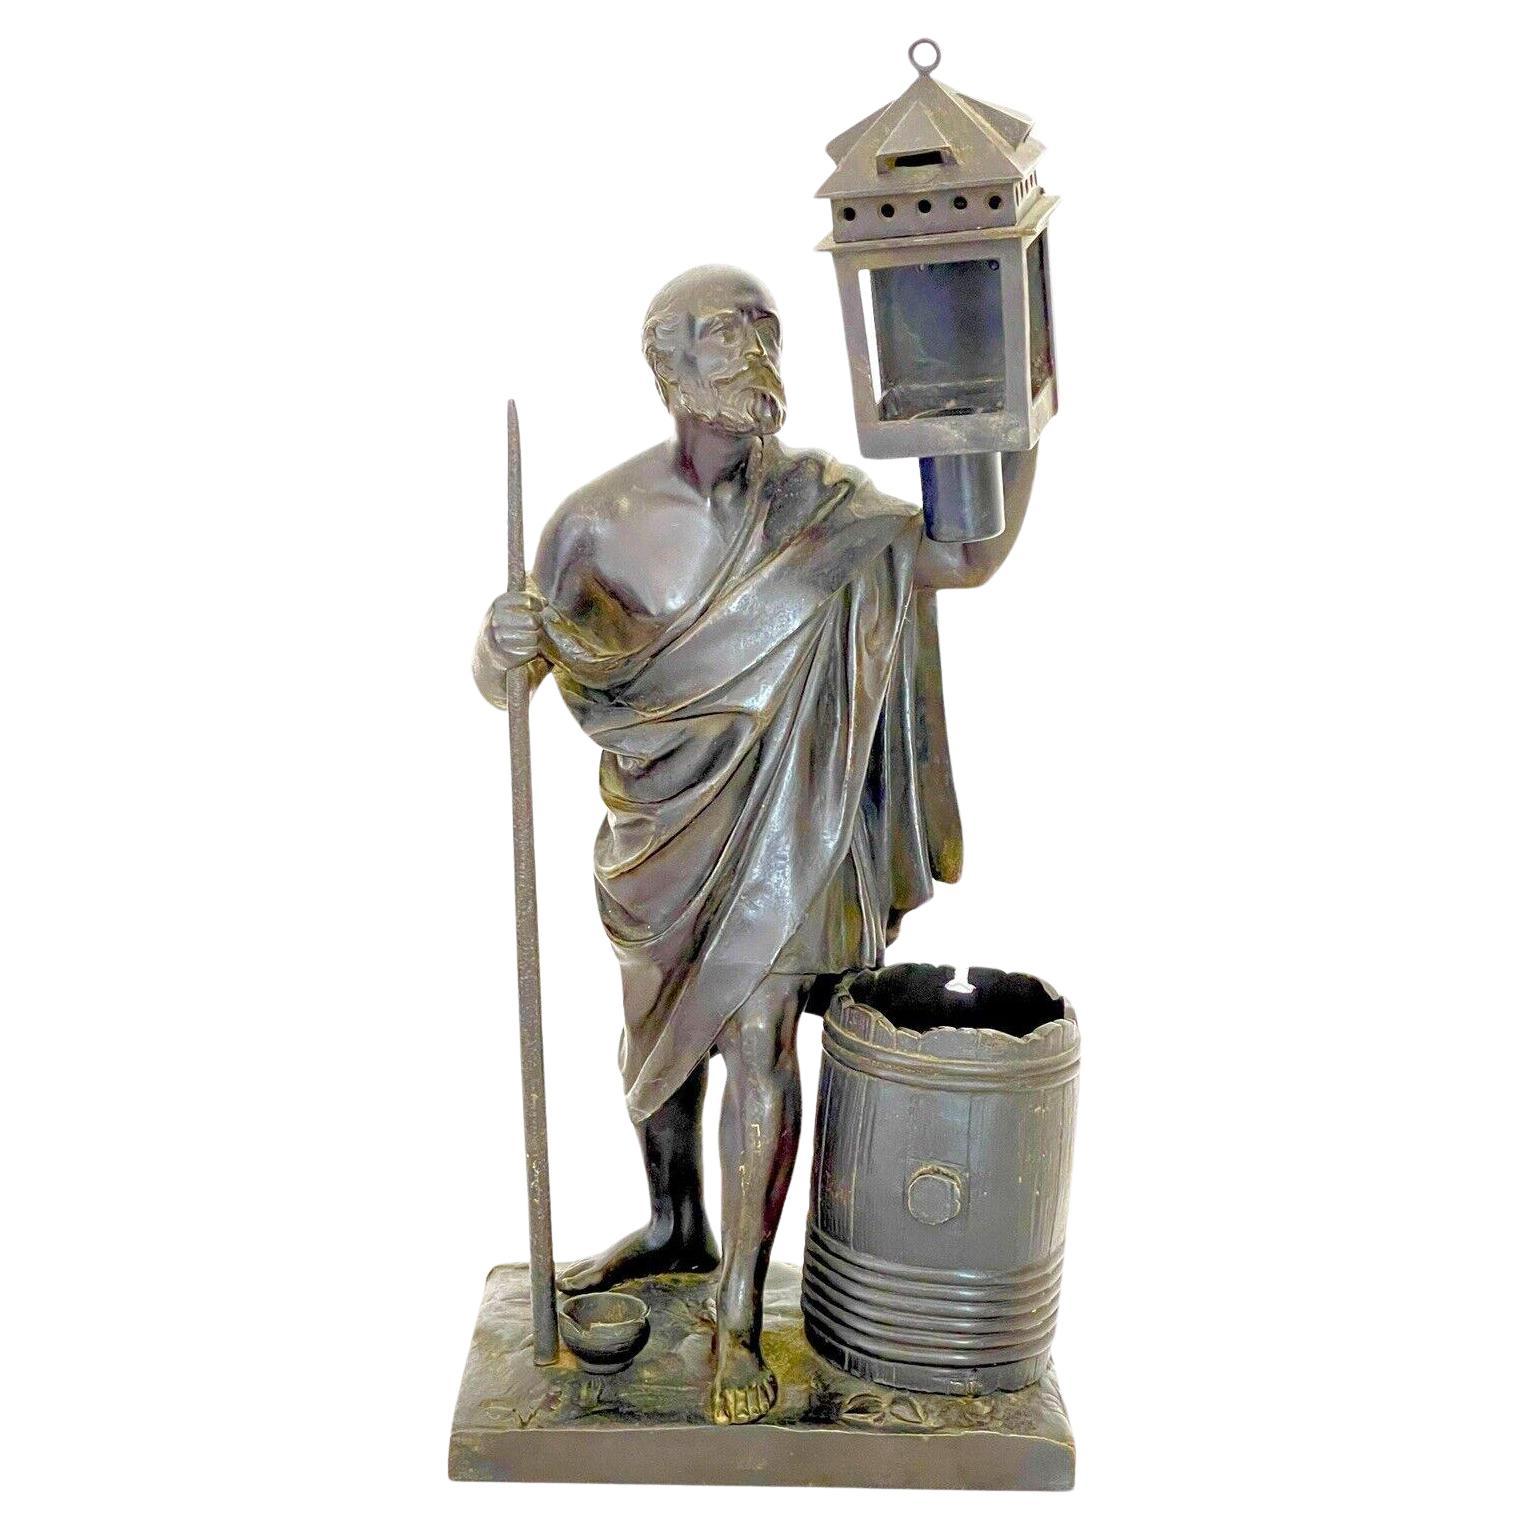 c1870 French Bronze Sculpture Lanmp "Diogenes" Greek Philosopher by Barbedienne For Sale